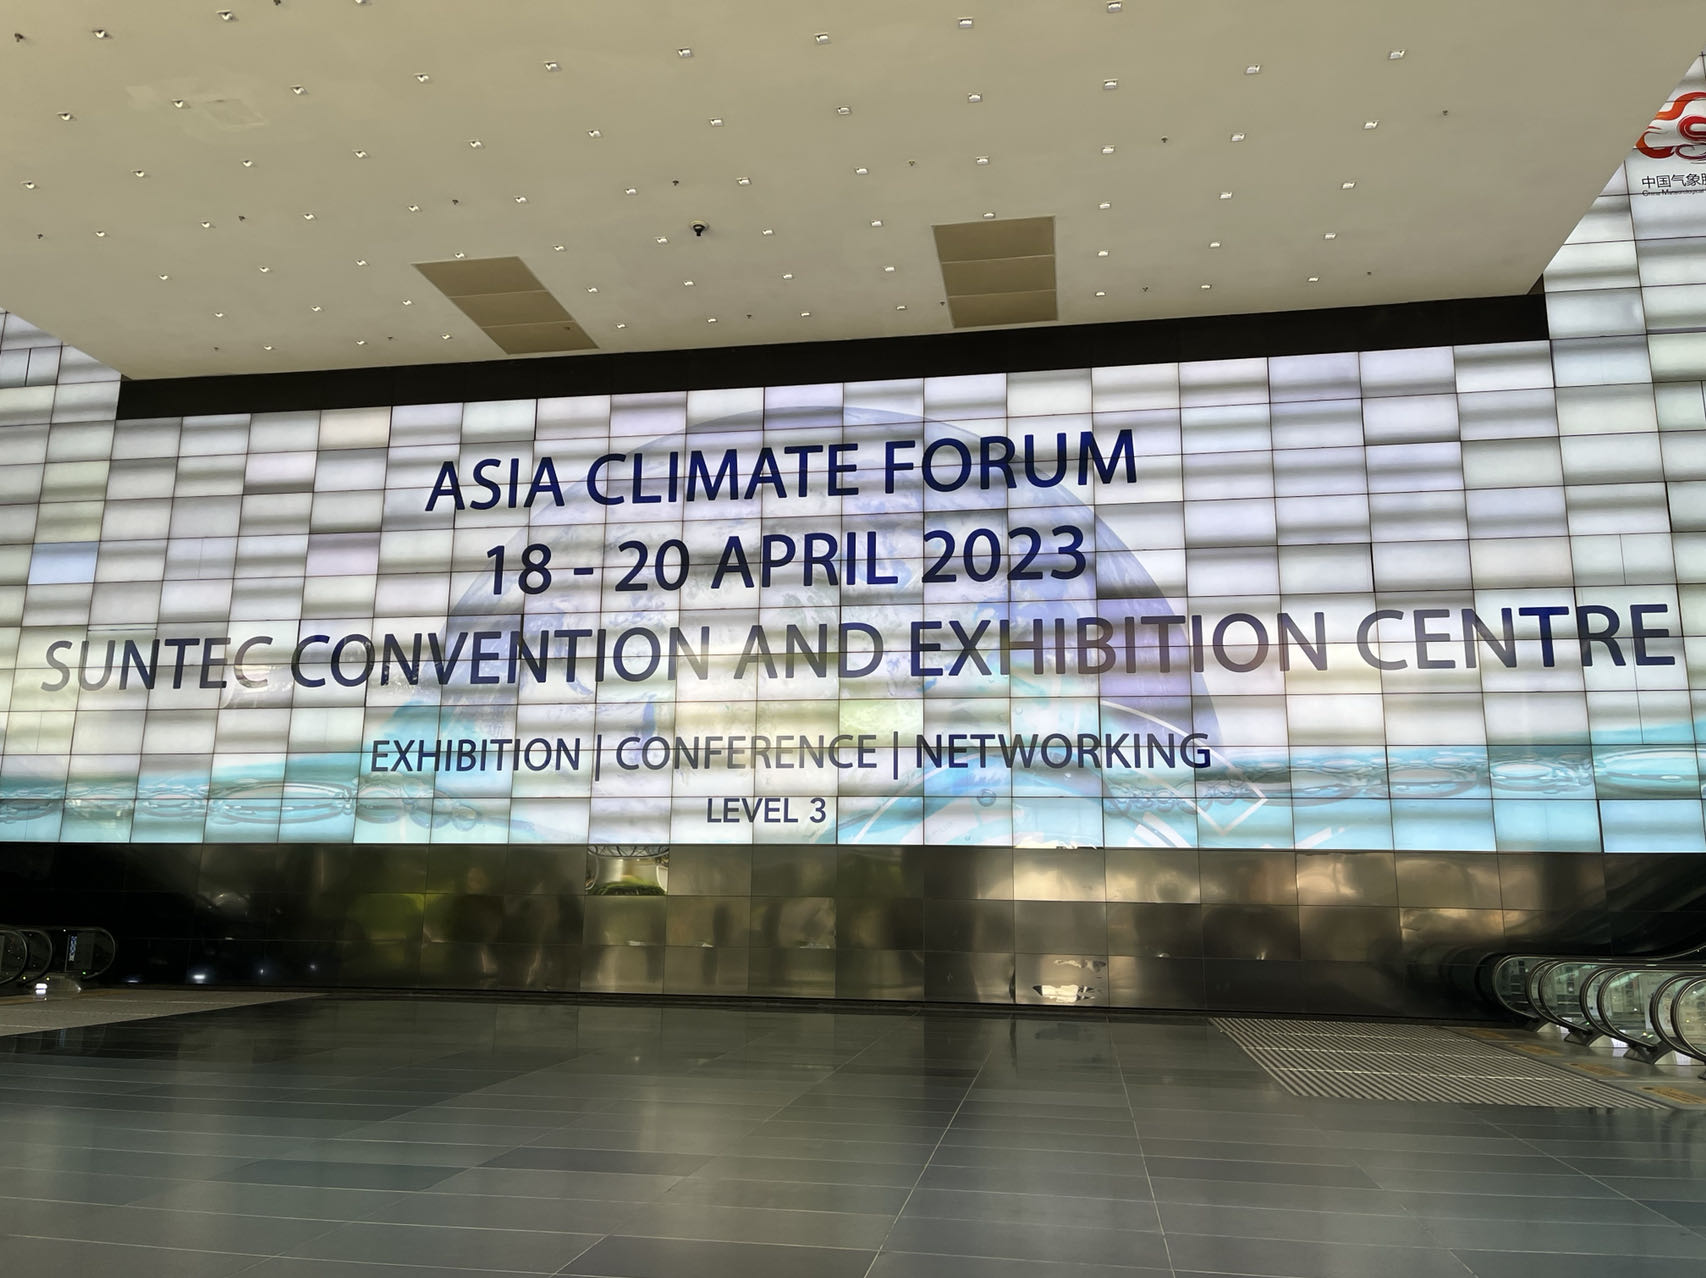 Attended Exhibition ASIA CLIMATE FORUM 2023(